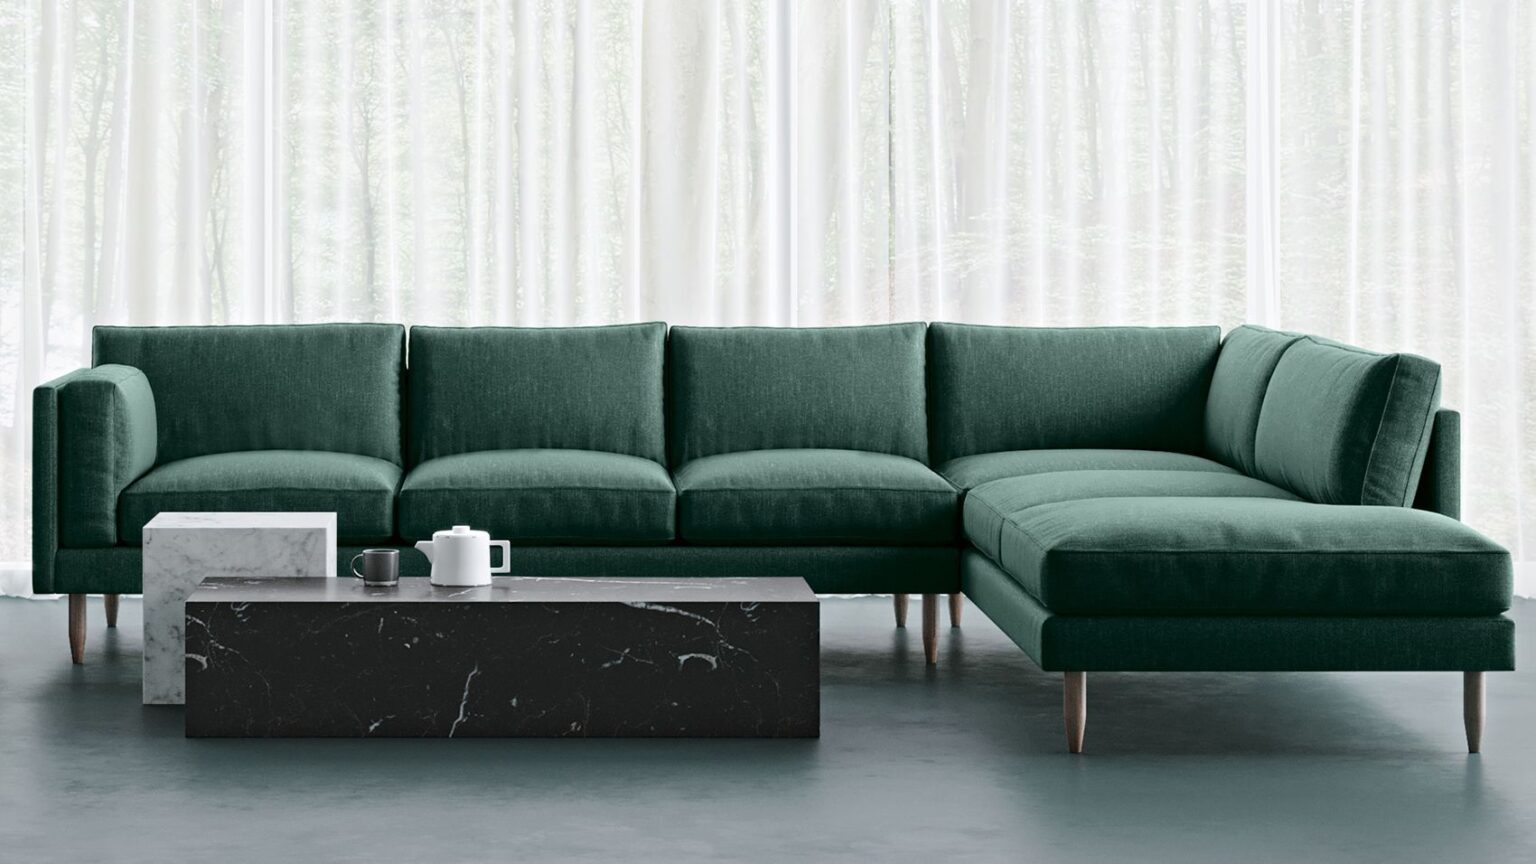 Choosing a sofa isn't easy. If you are looking to buy a sofa online, here are some tips that should help you to find the perfect sofa for you.